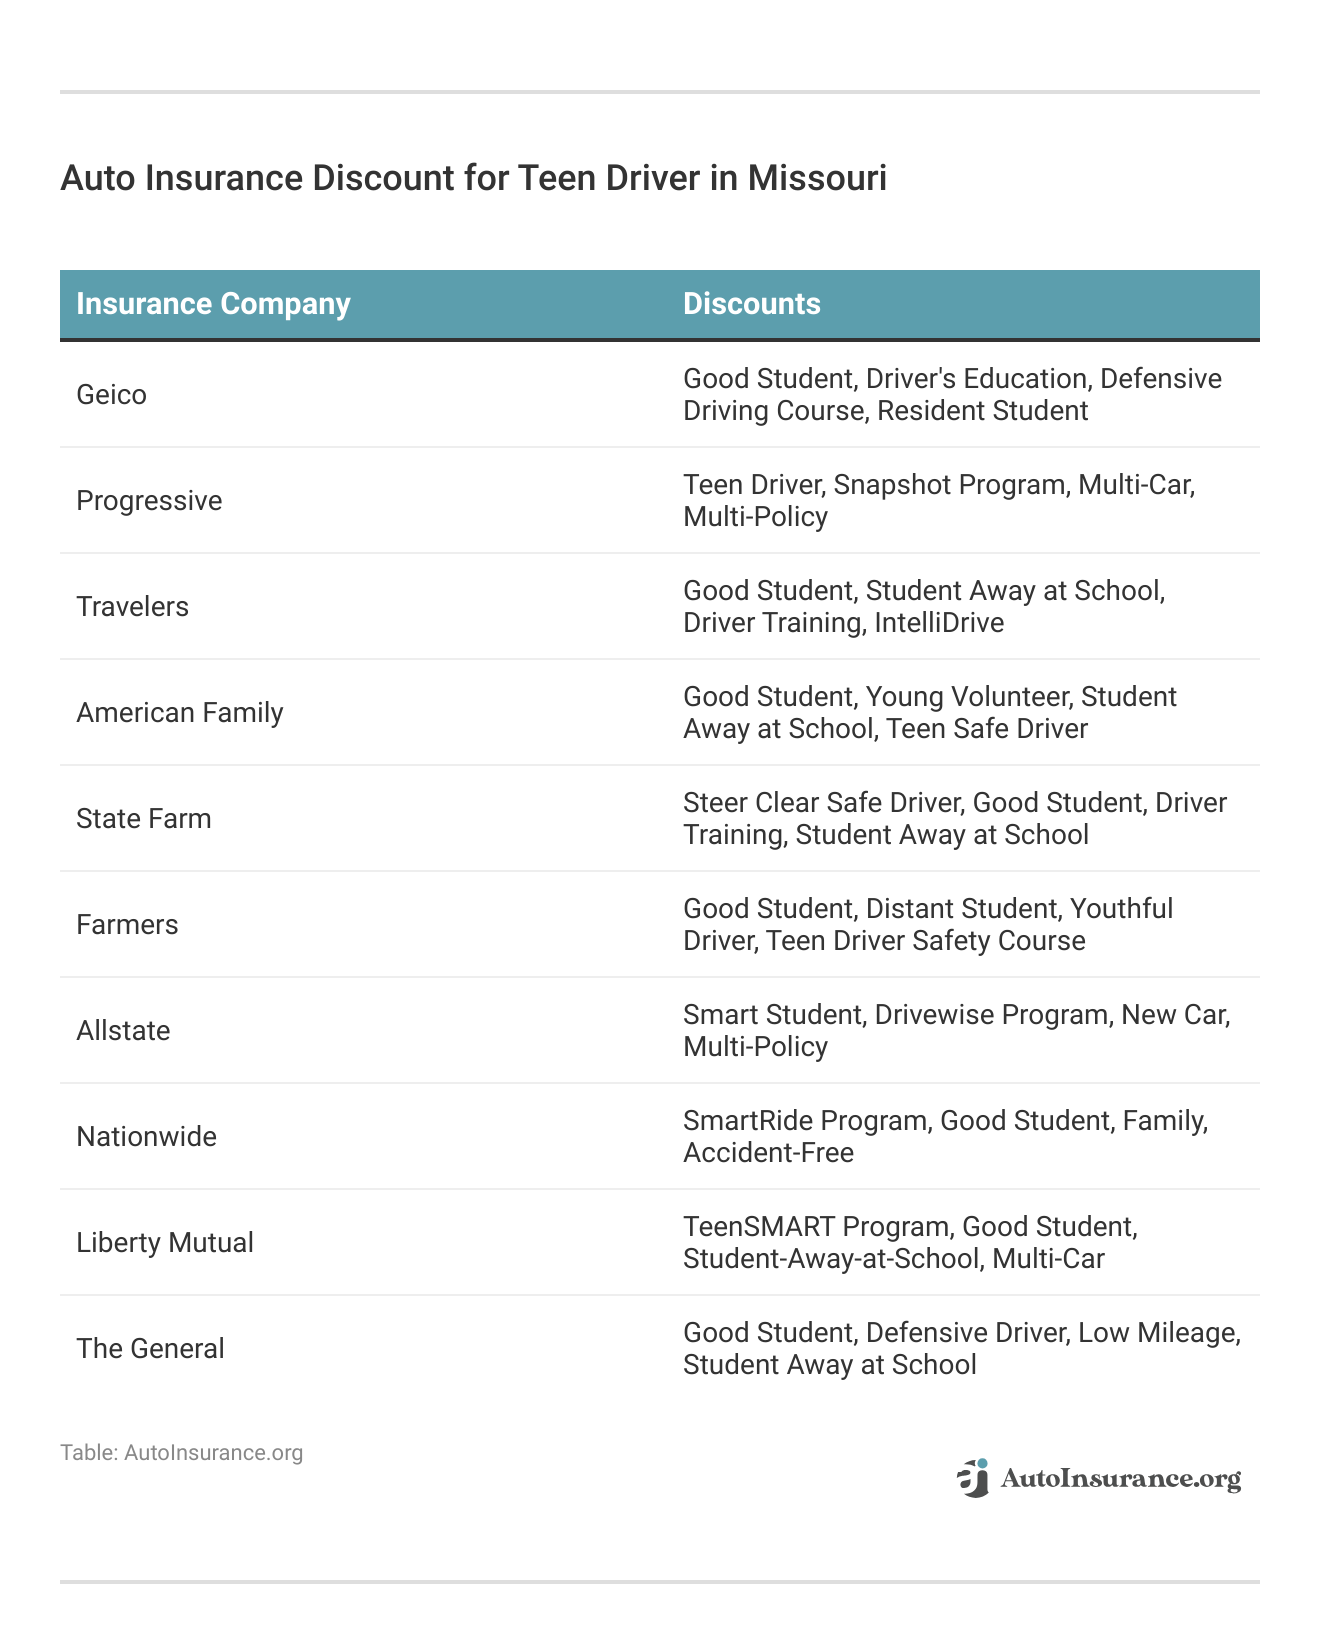 <h3>Auto Insurance Discount for Teen Driver in Missouri</h3>